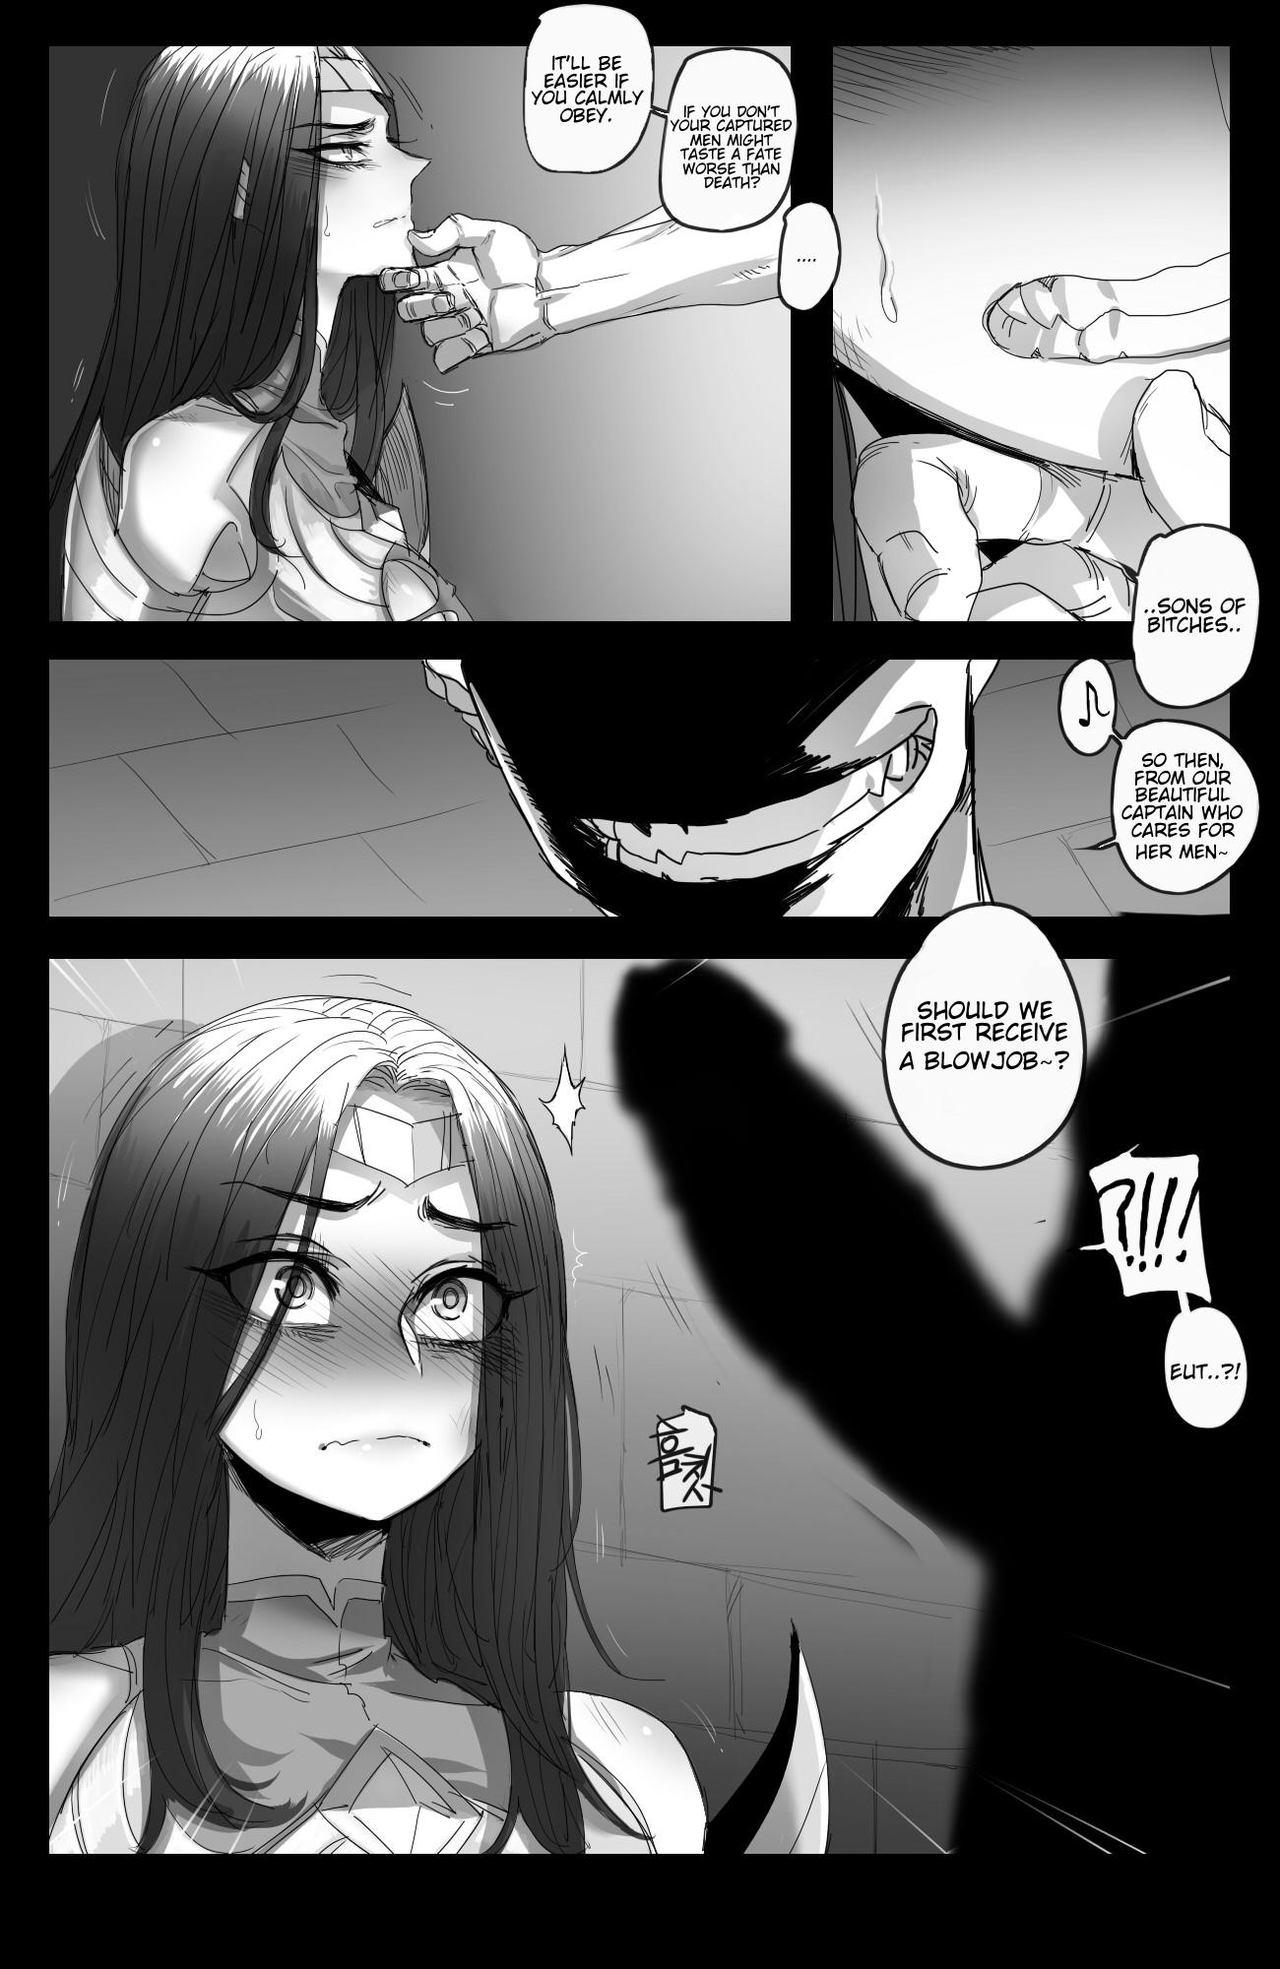 Top The Fall of Irelia - League of legends Tugjob - Page 4